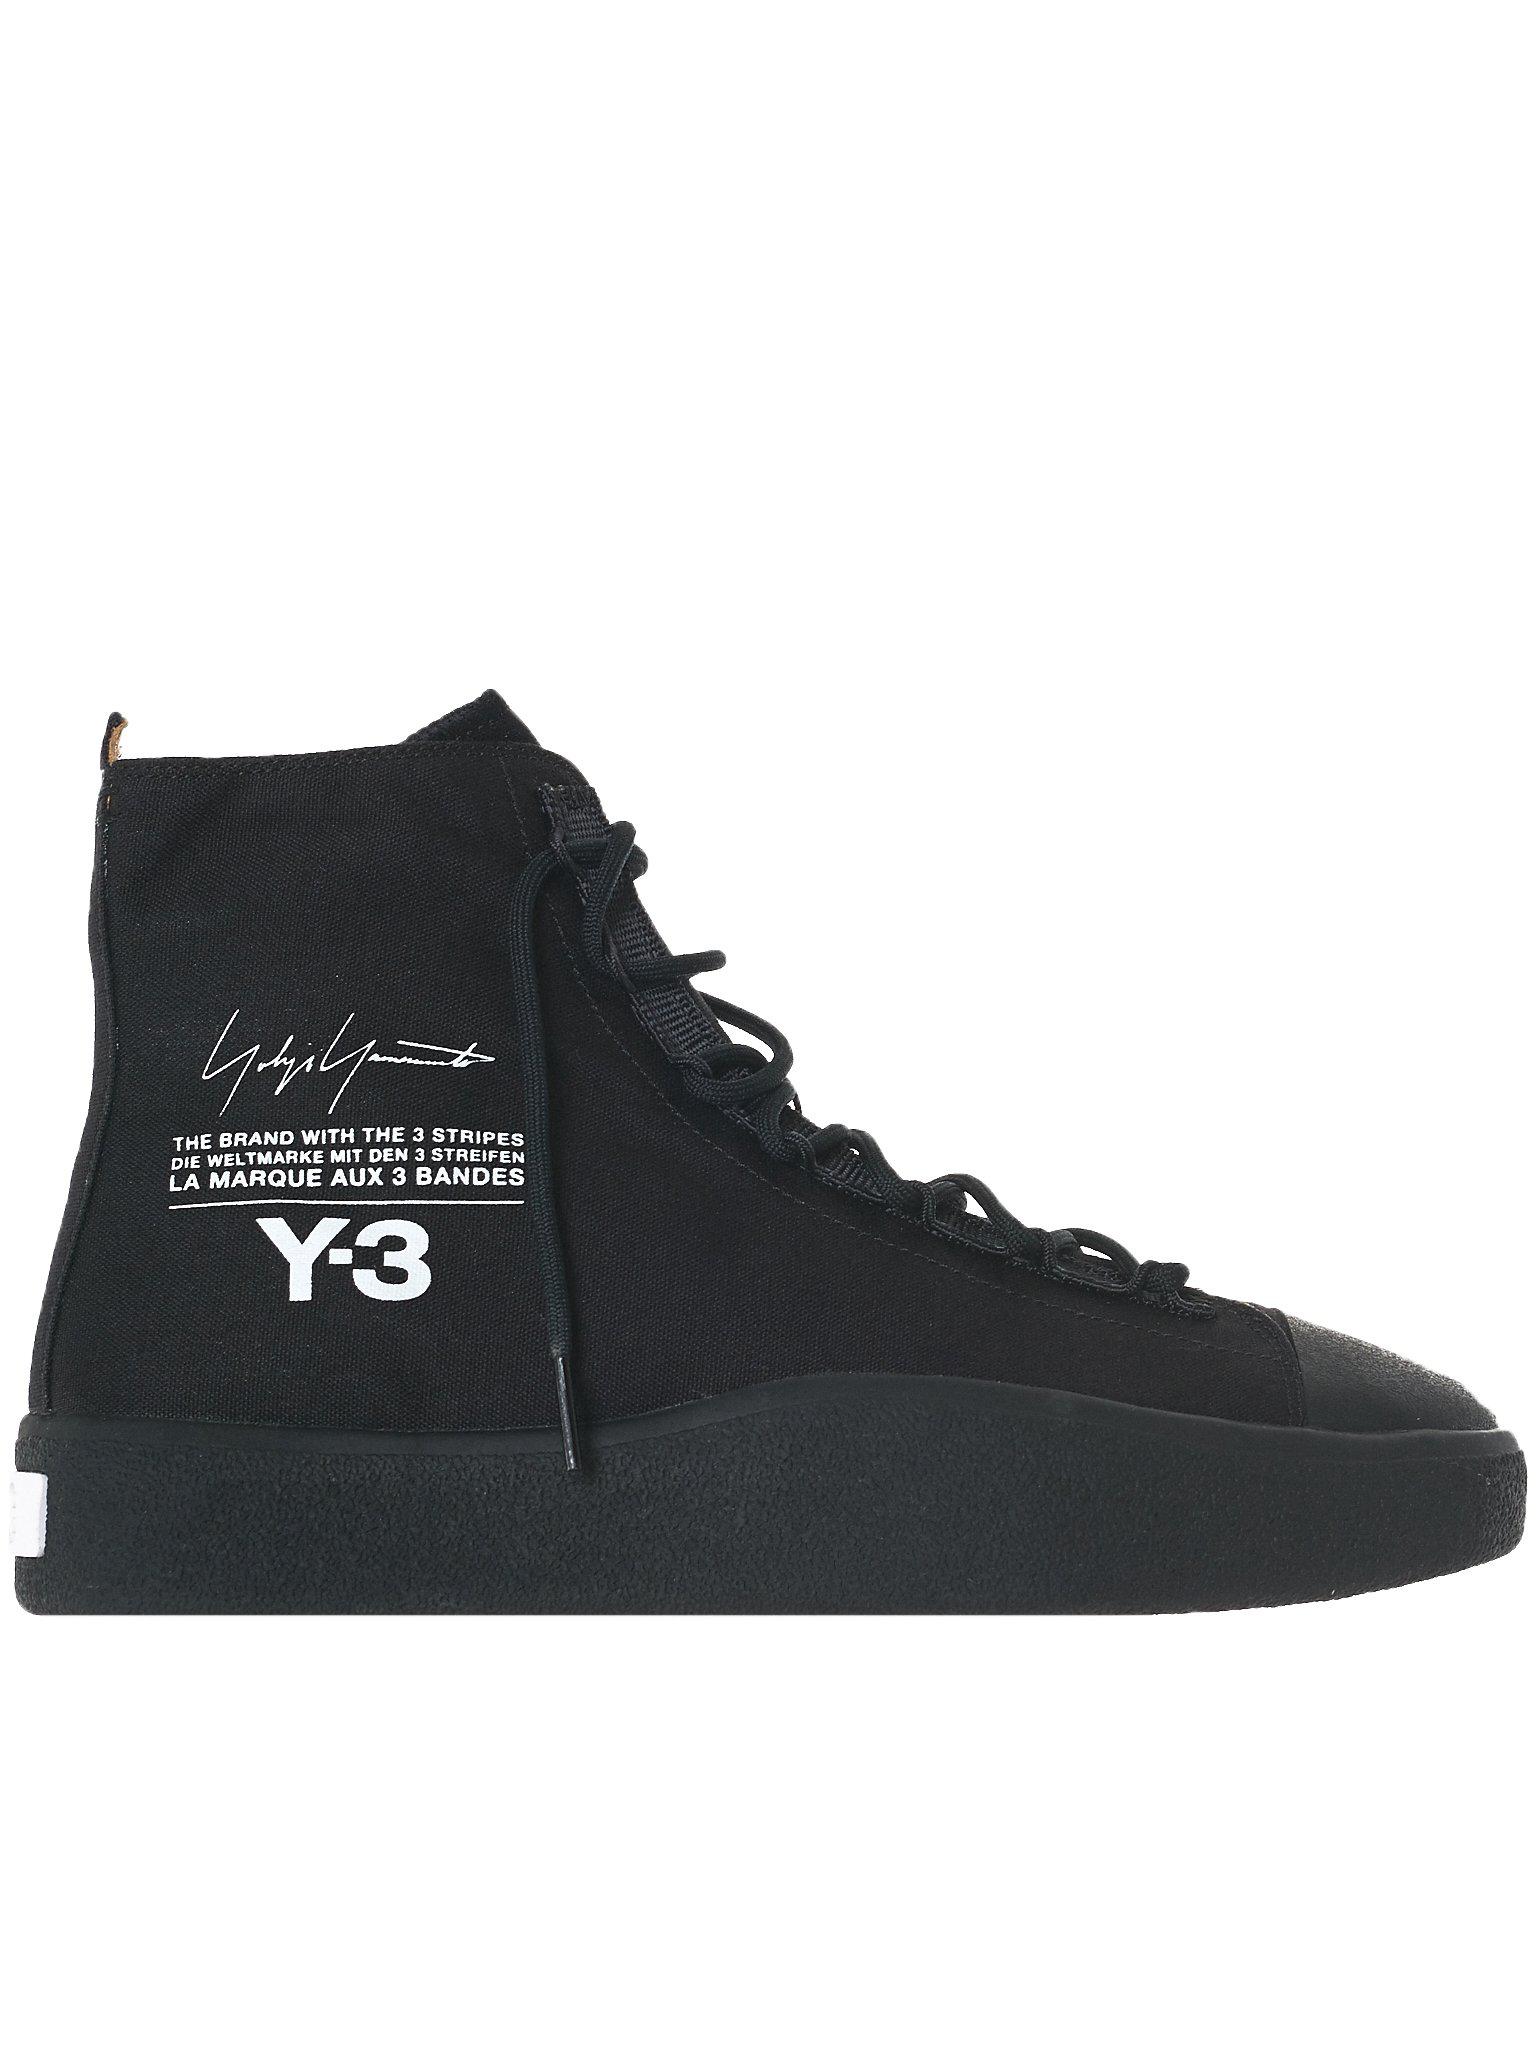 y3 high tops cheap online